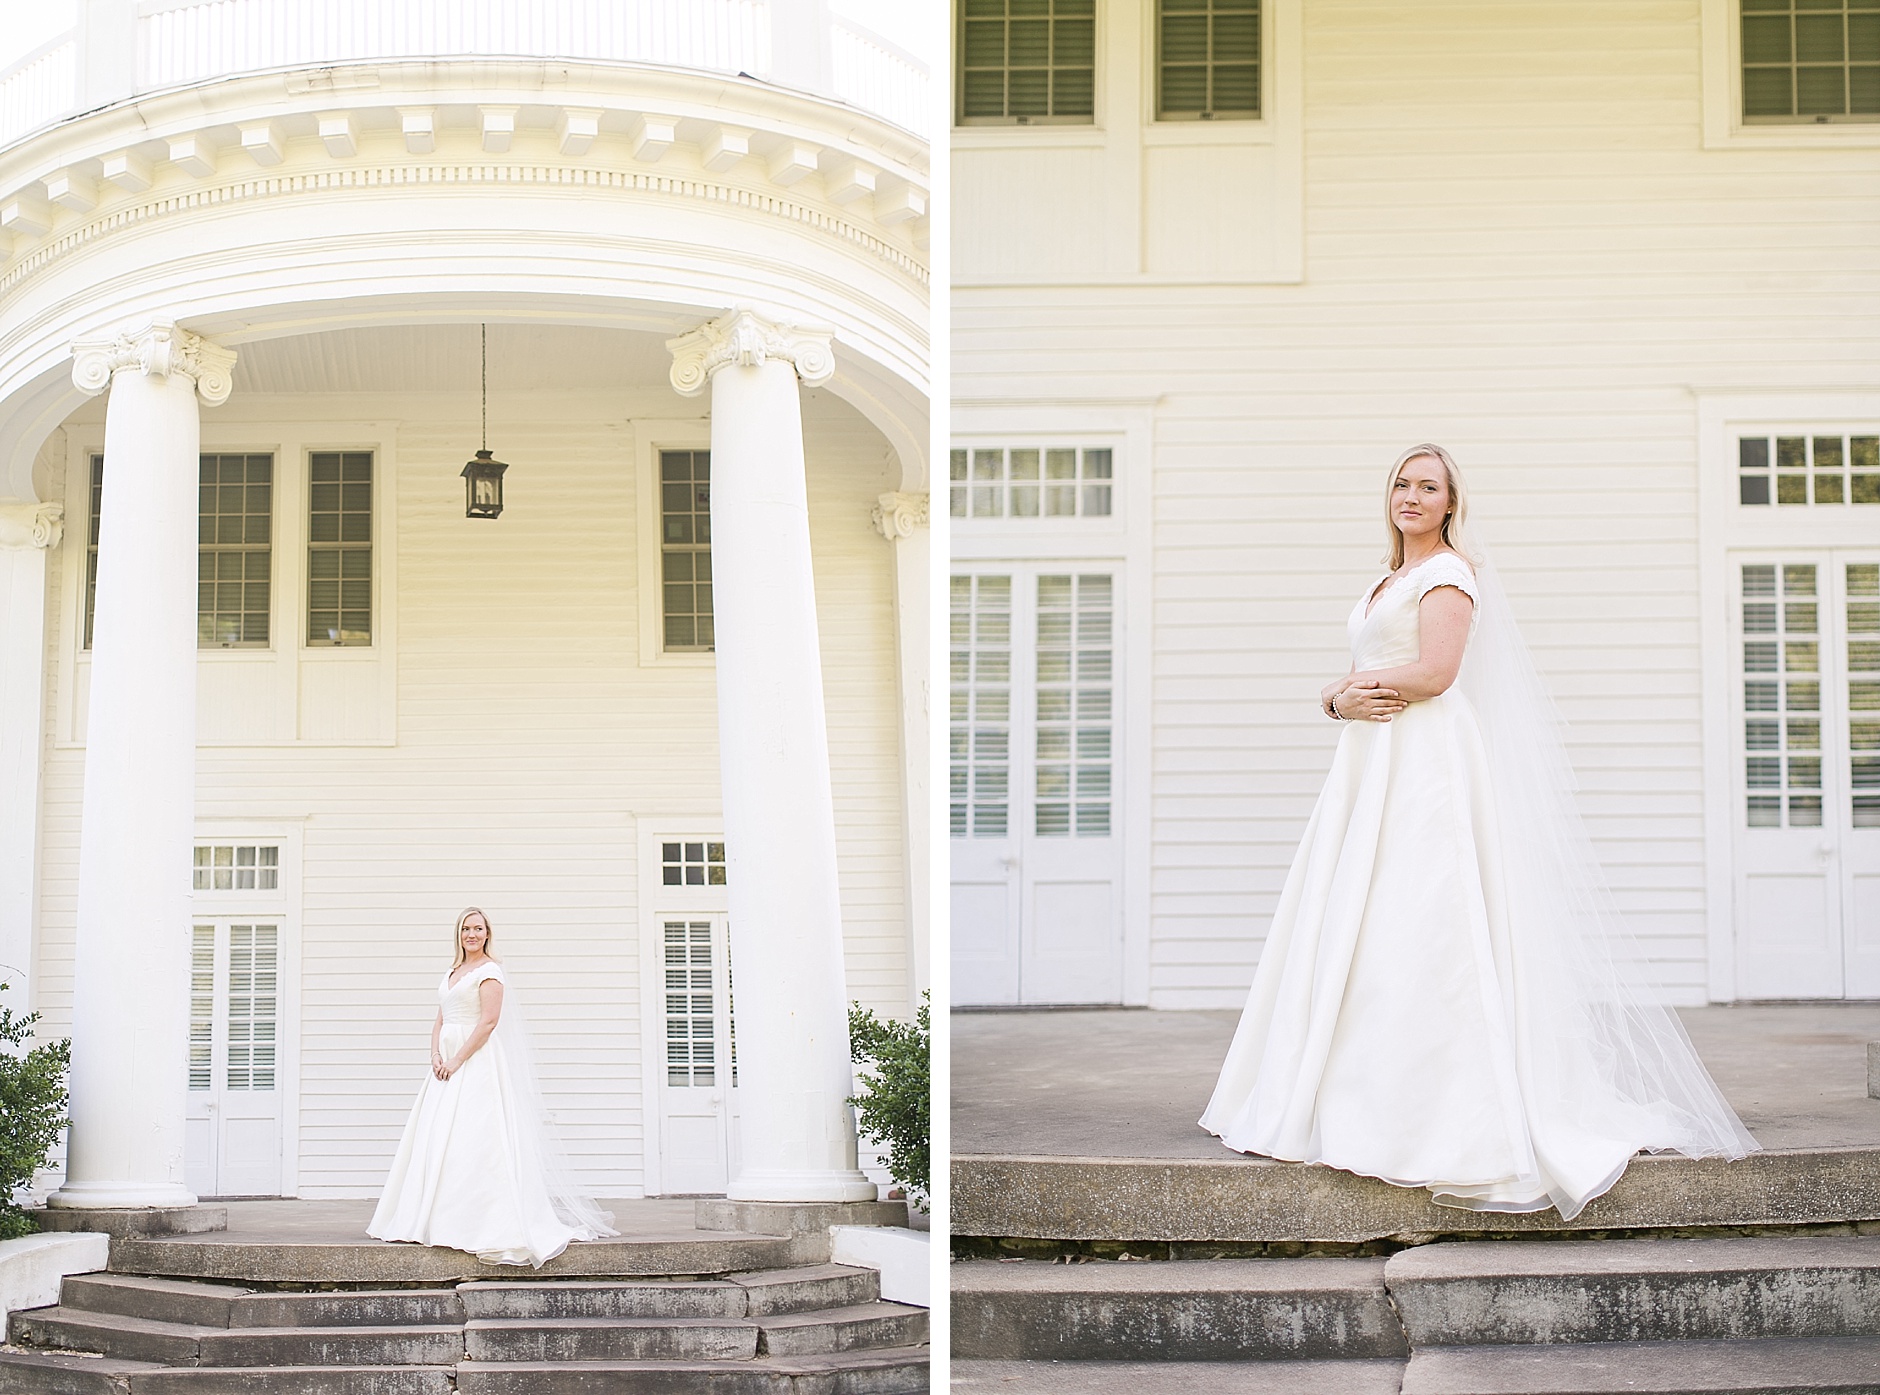 A Historic Family Home bridal session by Rachael Houser Photography